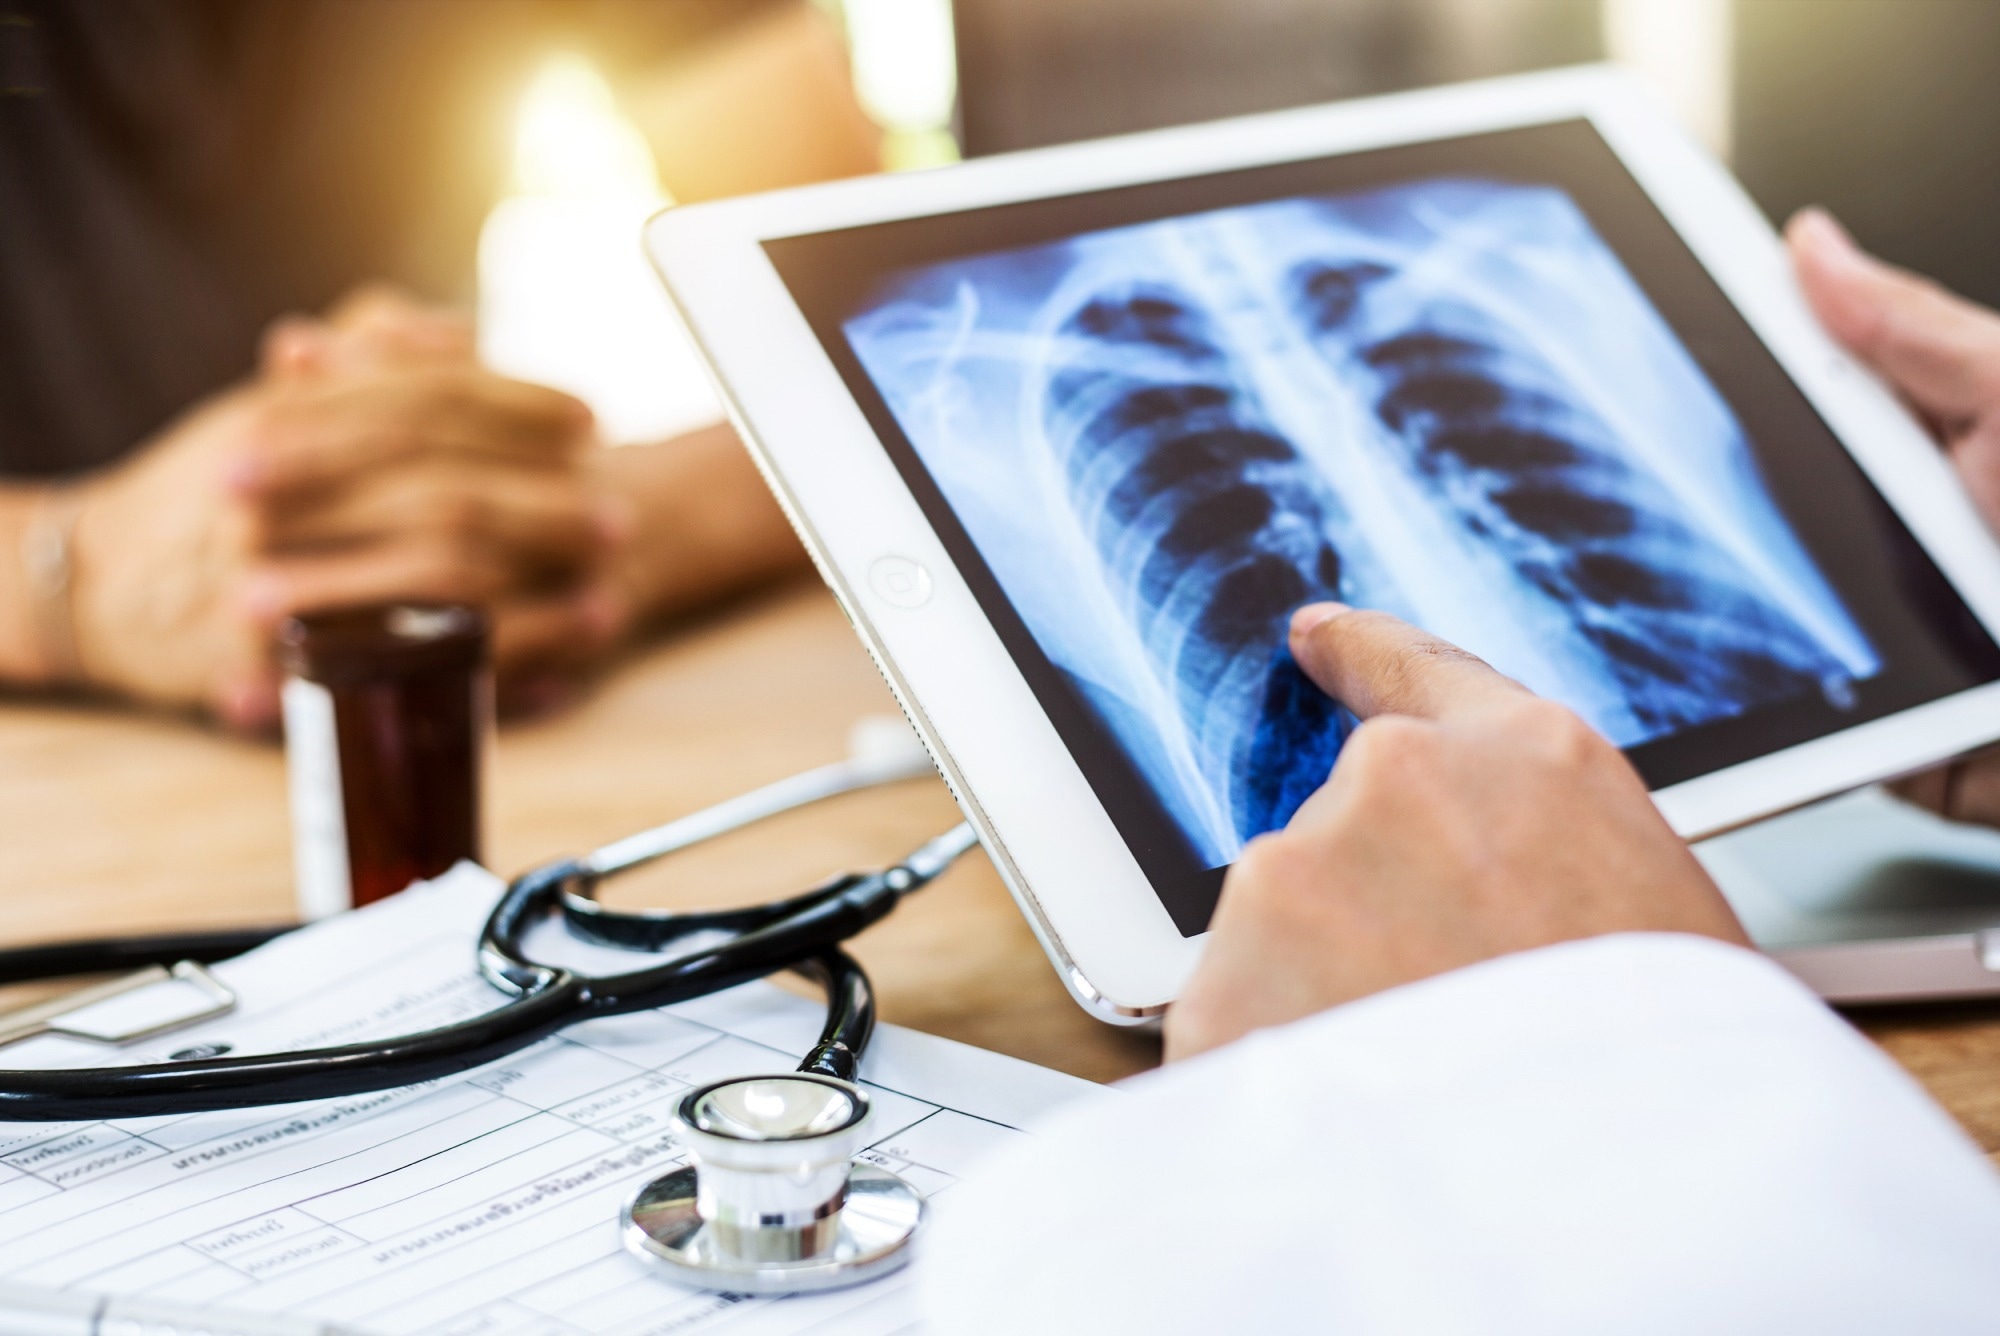 Study: Development of artificial intelligence prognostic model for surgically resected non-small cell lung cancer. Image Credit: poylock19 / Shutterstock.com